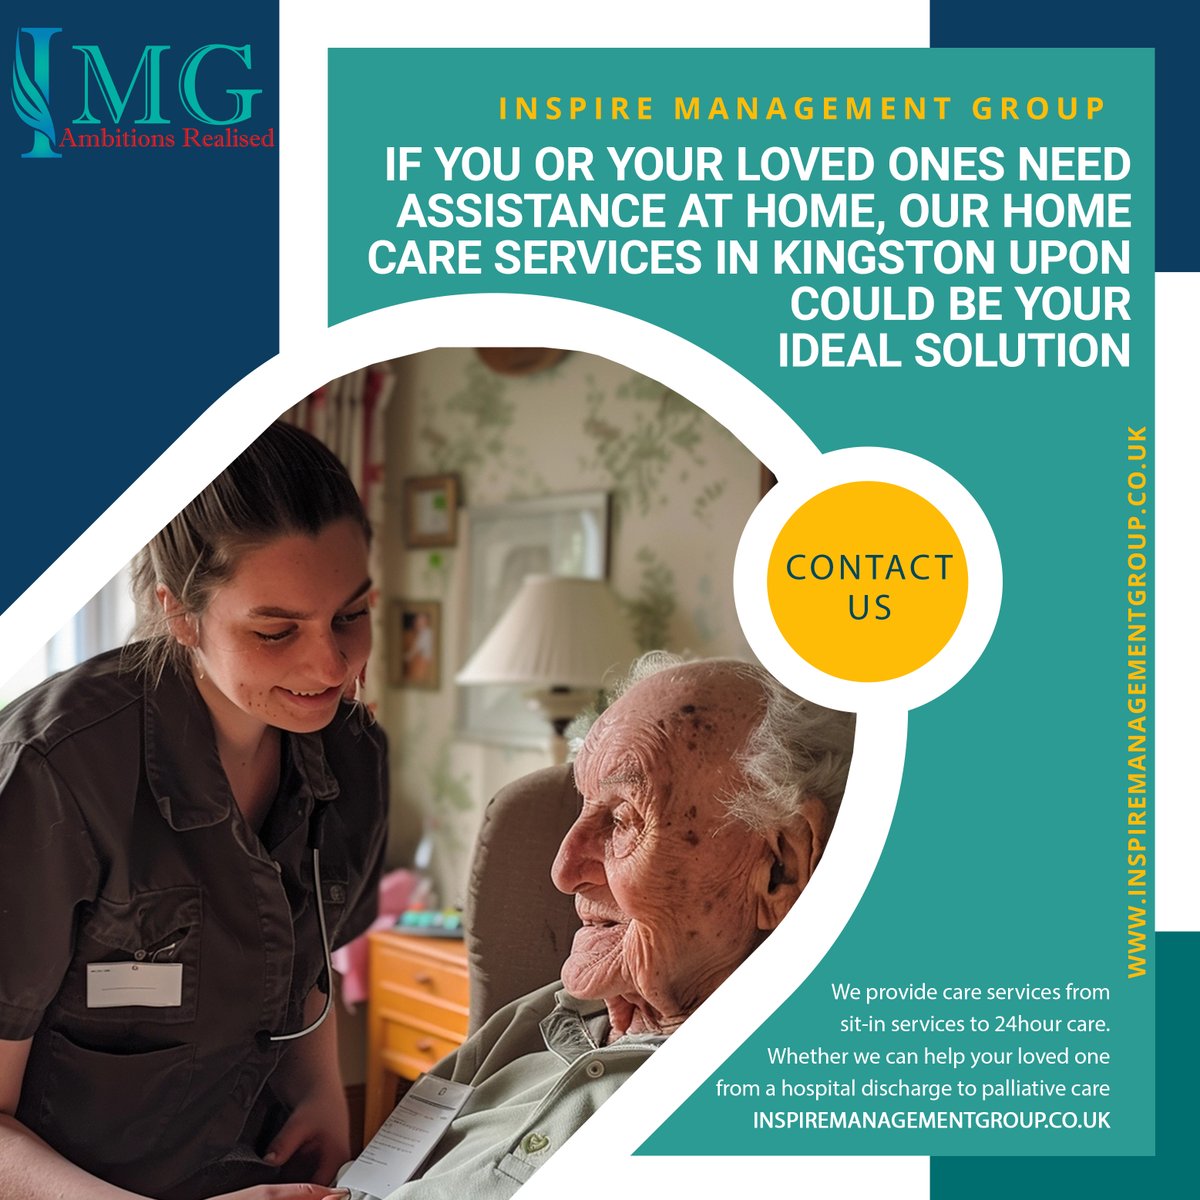 We tailor our home care services to suit you and your caring requirements. Contact our friendly team today inspiremanagementgroup.co.uk #care #homecare #careservices #palliativecare #kingstonuponthames